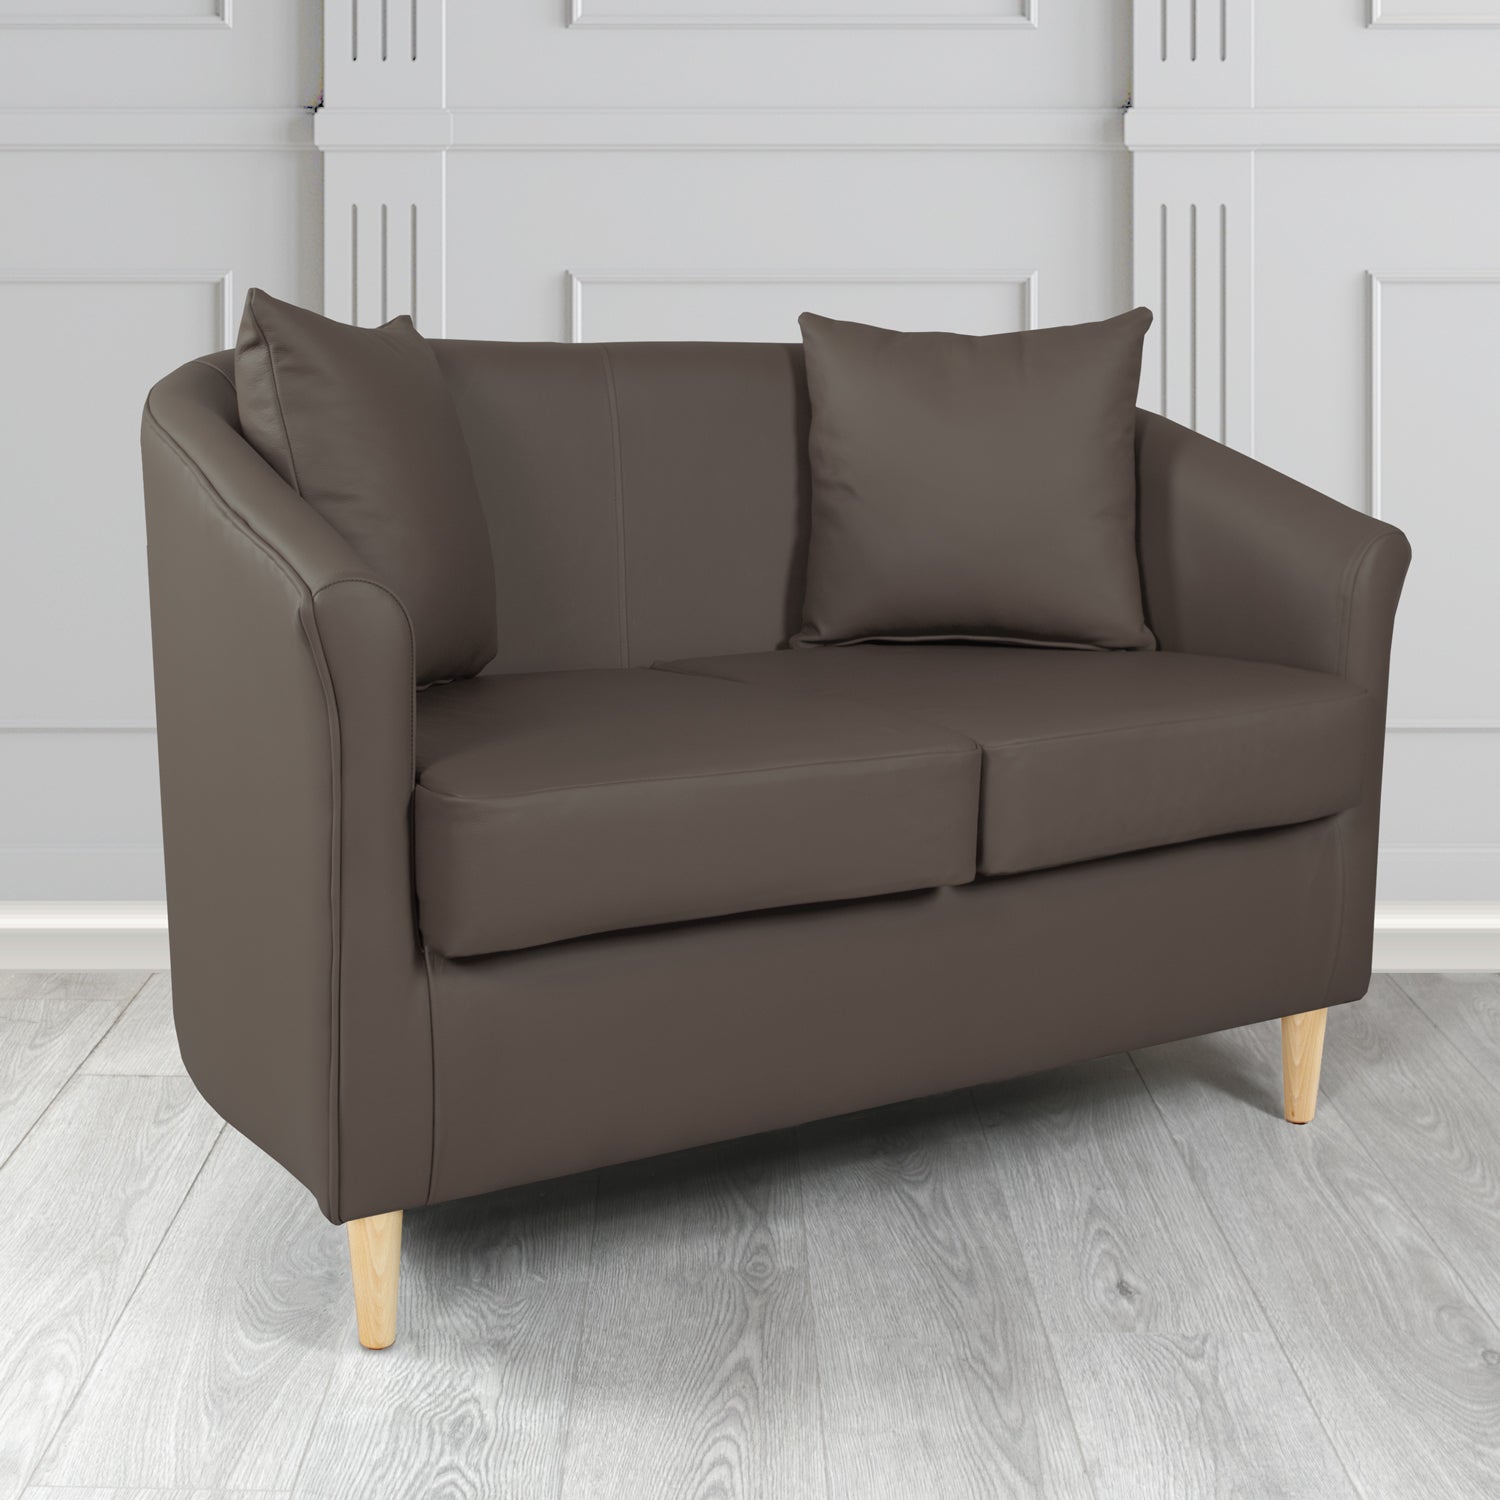 St Tropez 2 Seater Tub Sofa in Madrid Chocolate Faux Leather - The Tub Chair Shop